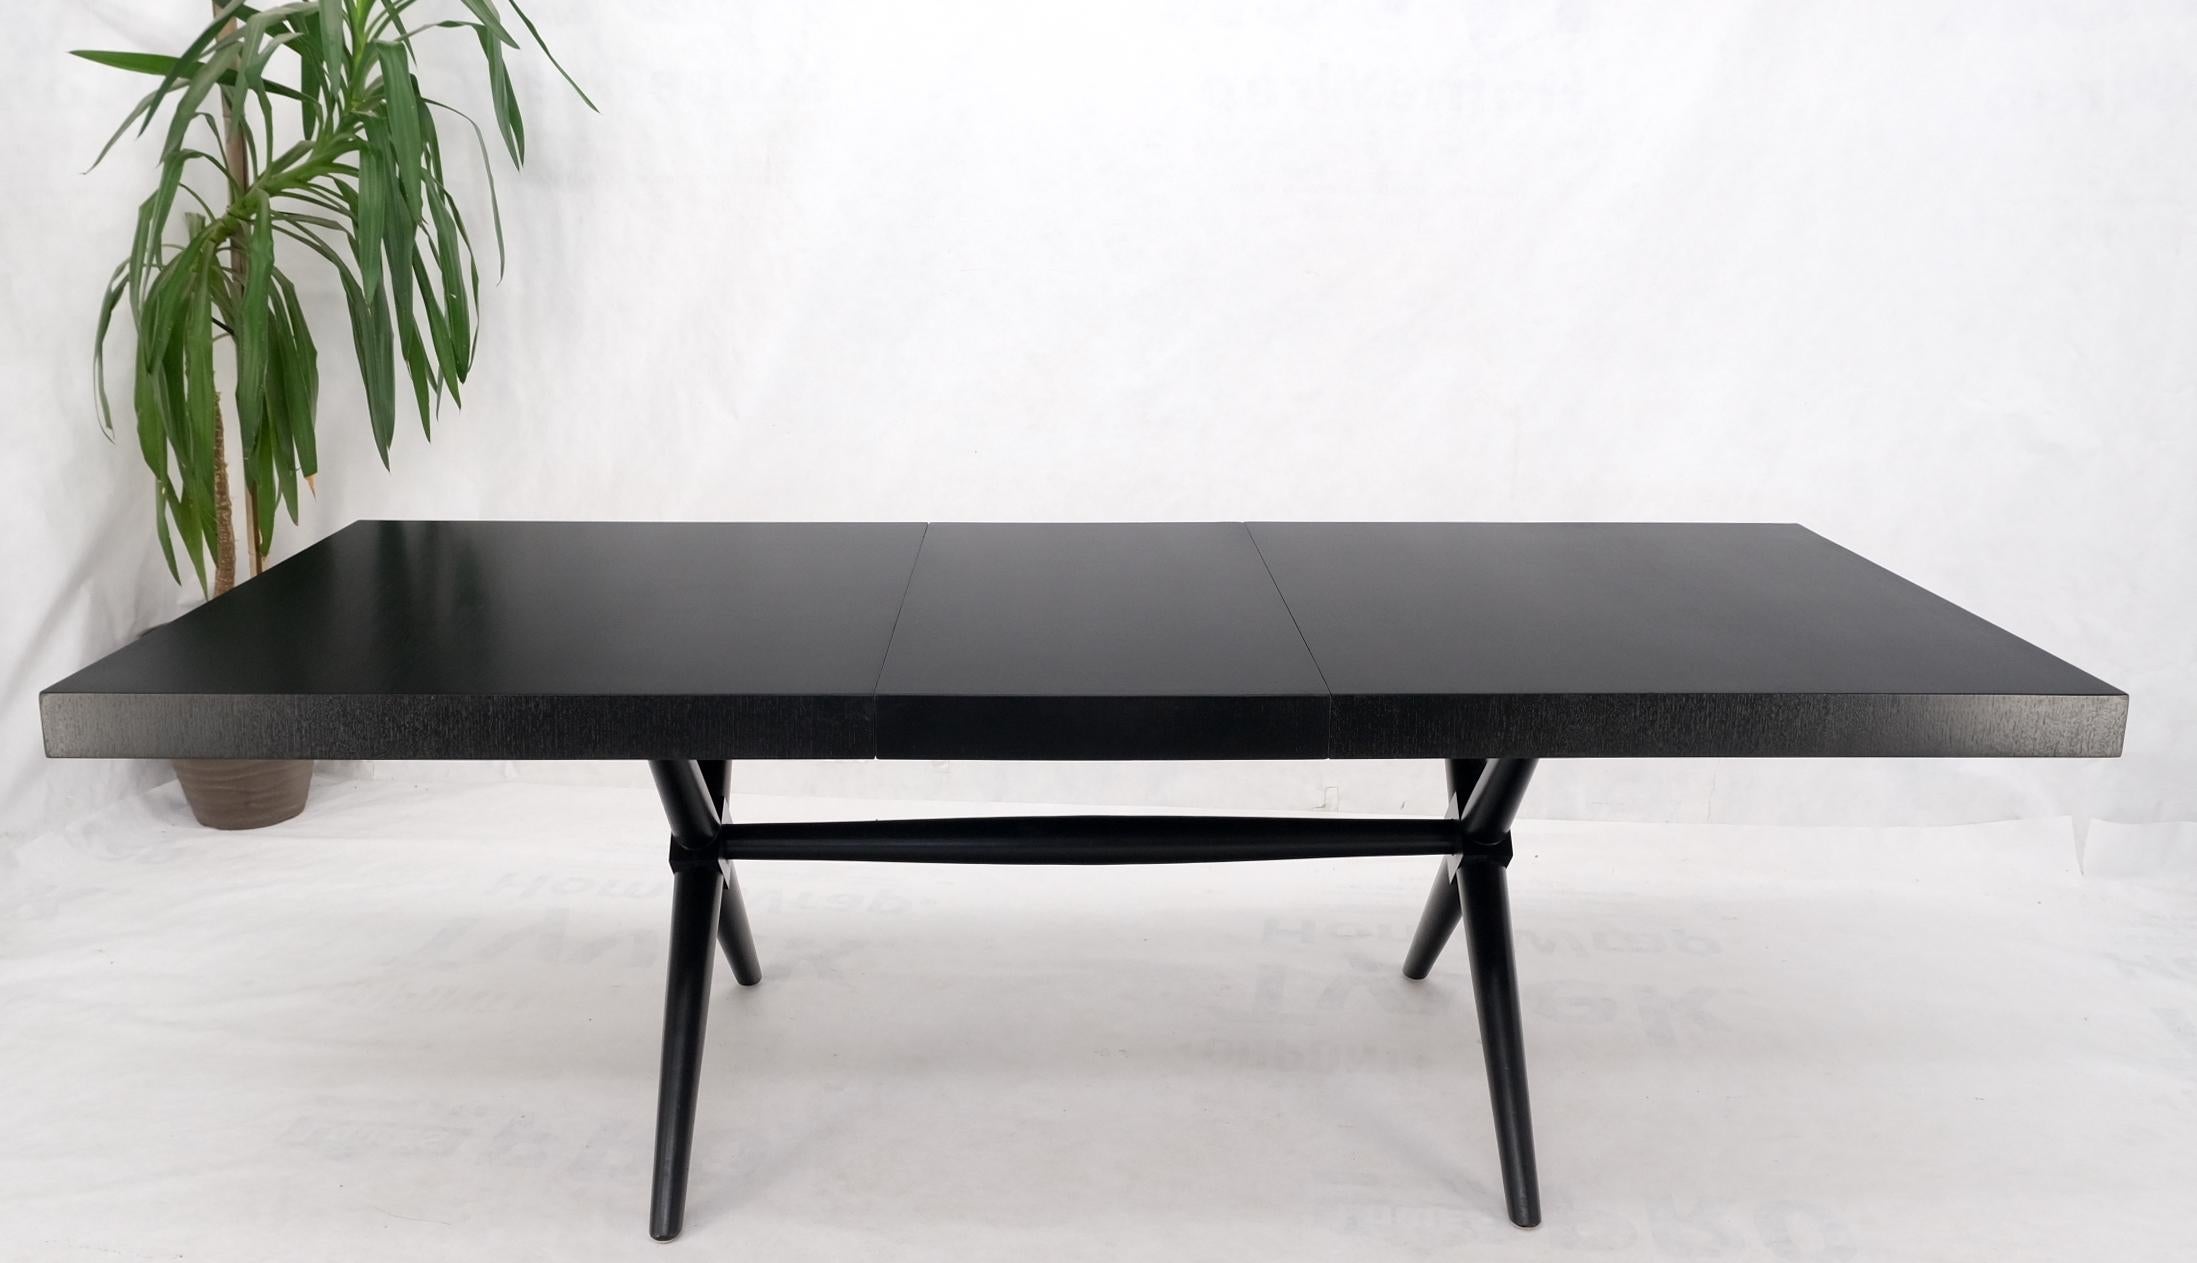 Black Lacquer One Leaf X Base Gibbings Trestle Dining Table by Widdicomb Mint For Sale 6